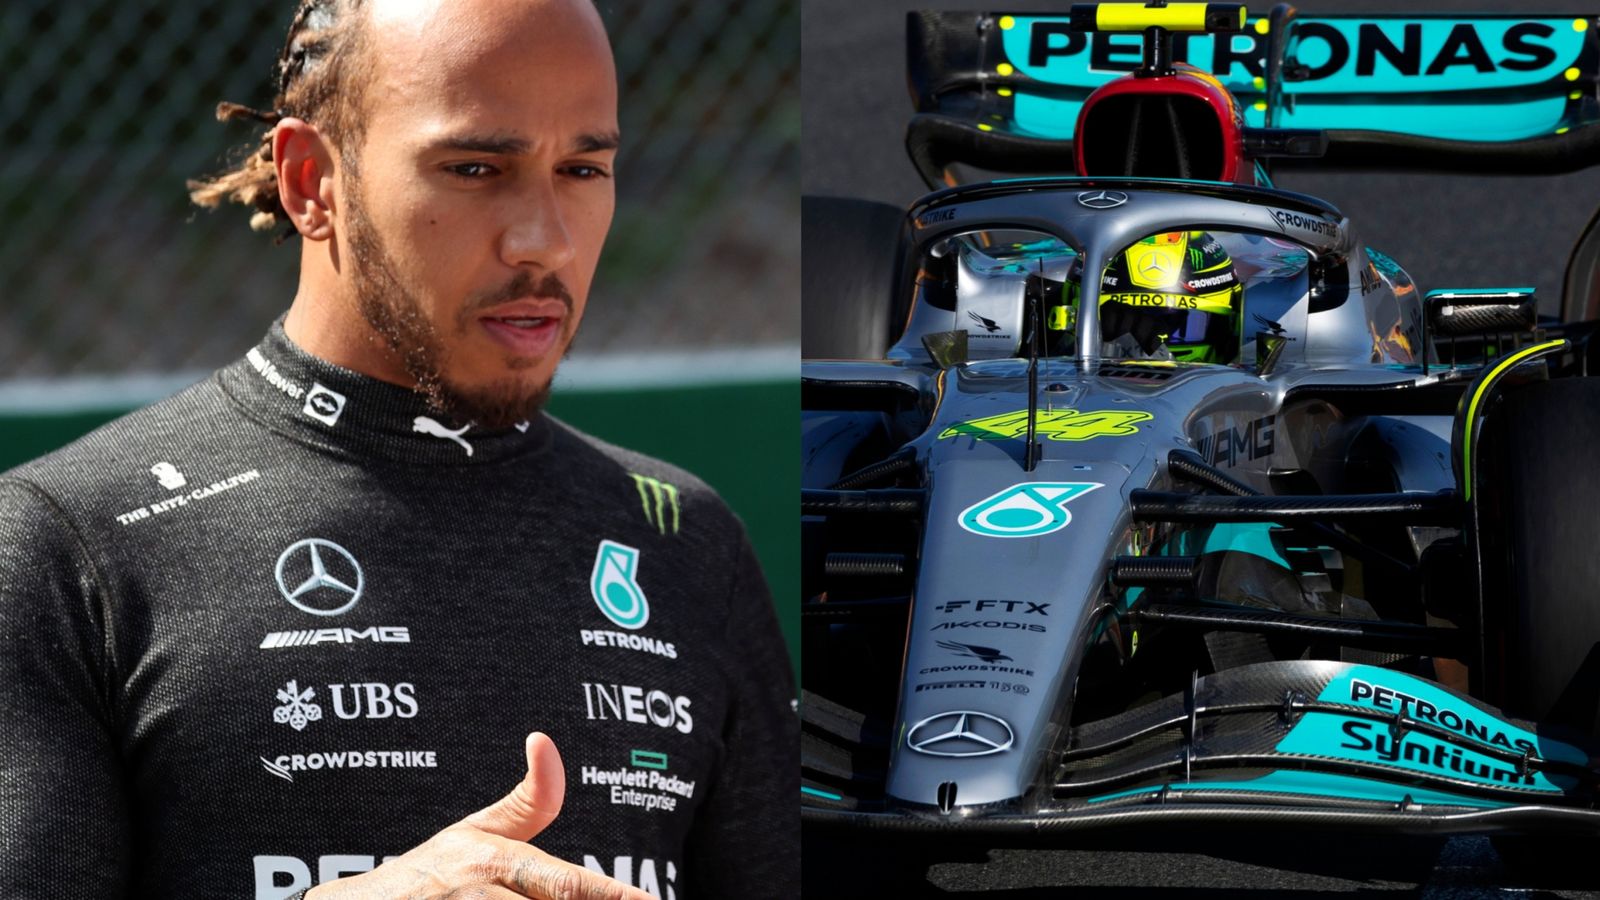 mercedes-long-f1-wait-will-lewis-hamilton-or-george-russell-end-2022-win-drought-in-final-six-races